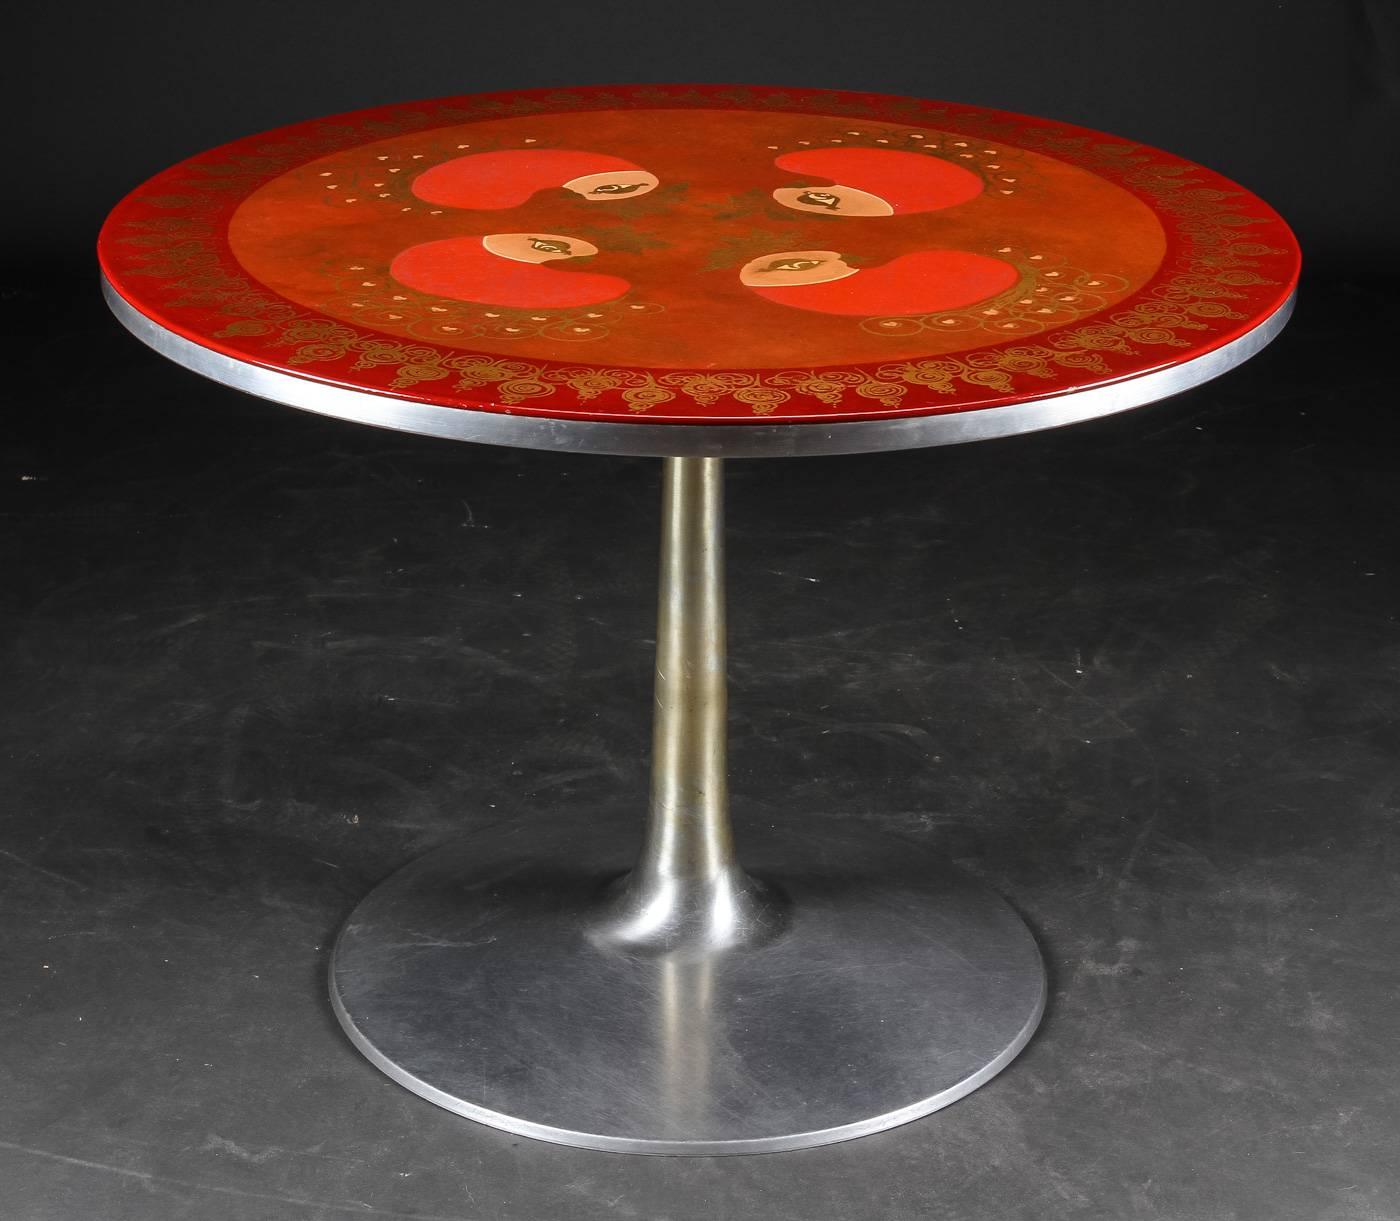 Elegant circular dining table of trumpet aluminum, adorned with intricately hand-painted bird motif with reds, oranges and gold filigree by Susanne Fjeldsøe “Mygge” (Signed "Mygge").